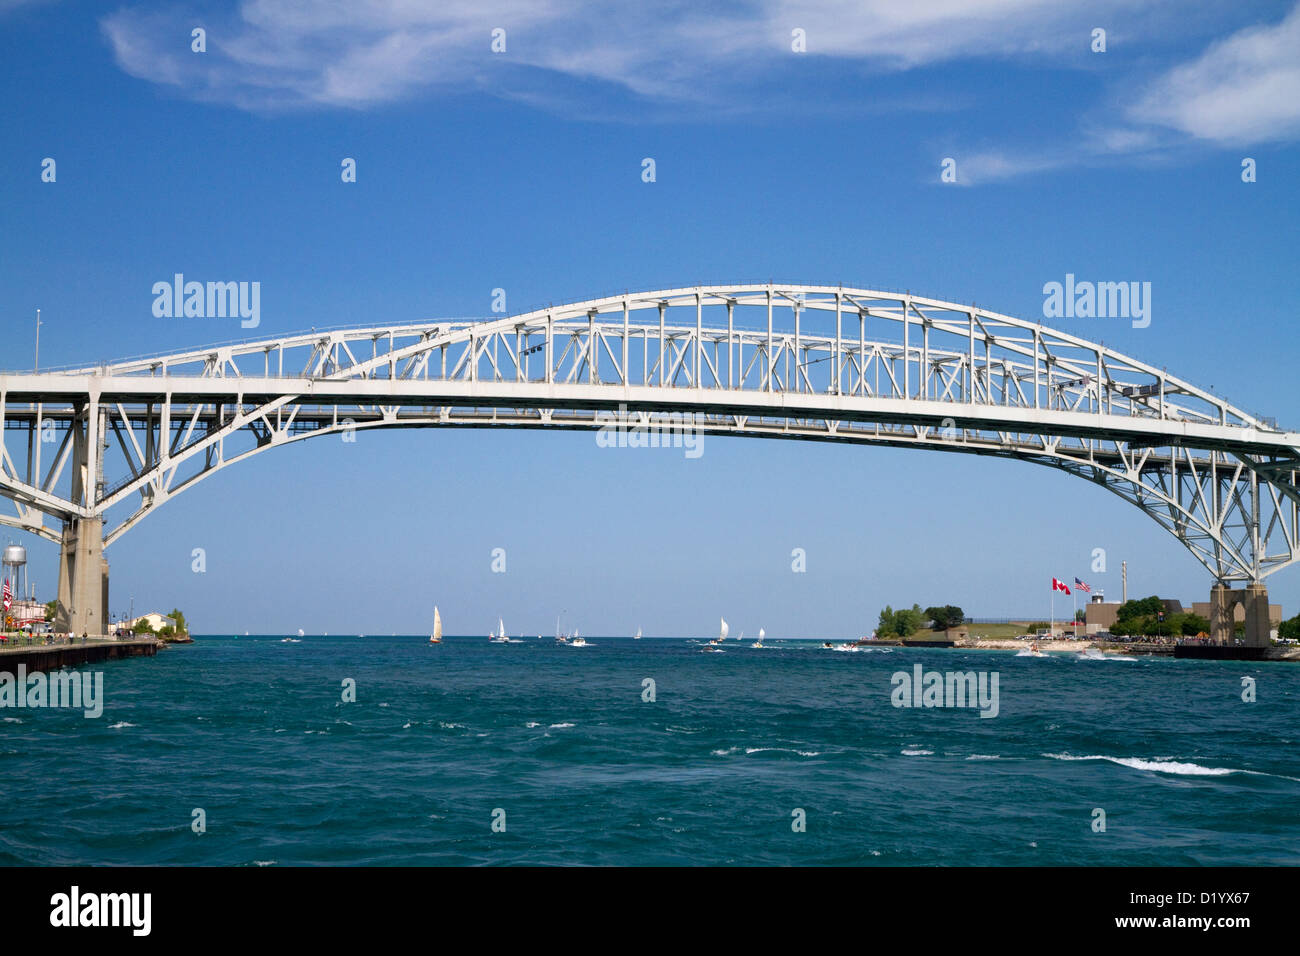 The Blue Water Bridge spanning the St. Clair River connects Port Huron, Michigan with Sarnia, Ontario, Canada. Stock Photo